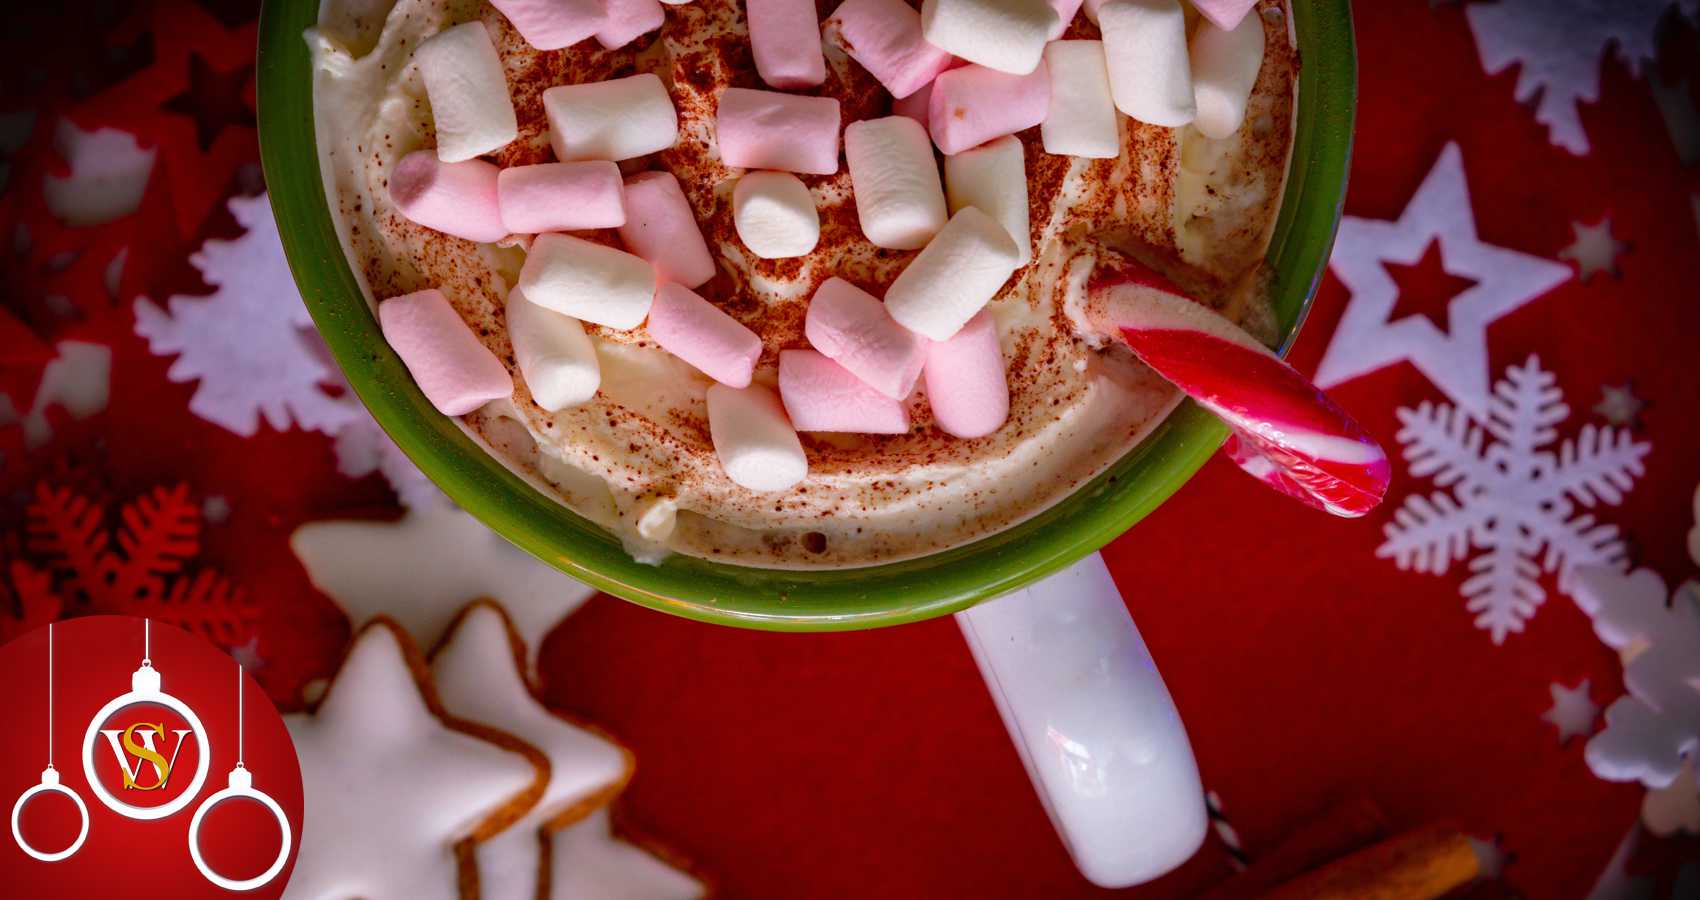 Hot Chocolate and Peppermint Schnapps, a poem by Chloe Gilholy at Spillwords.com